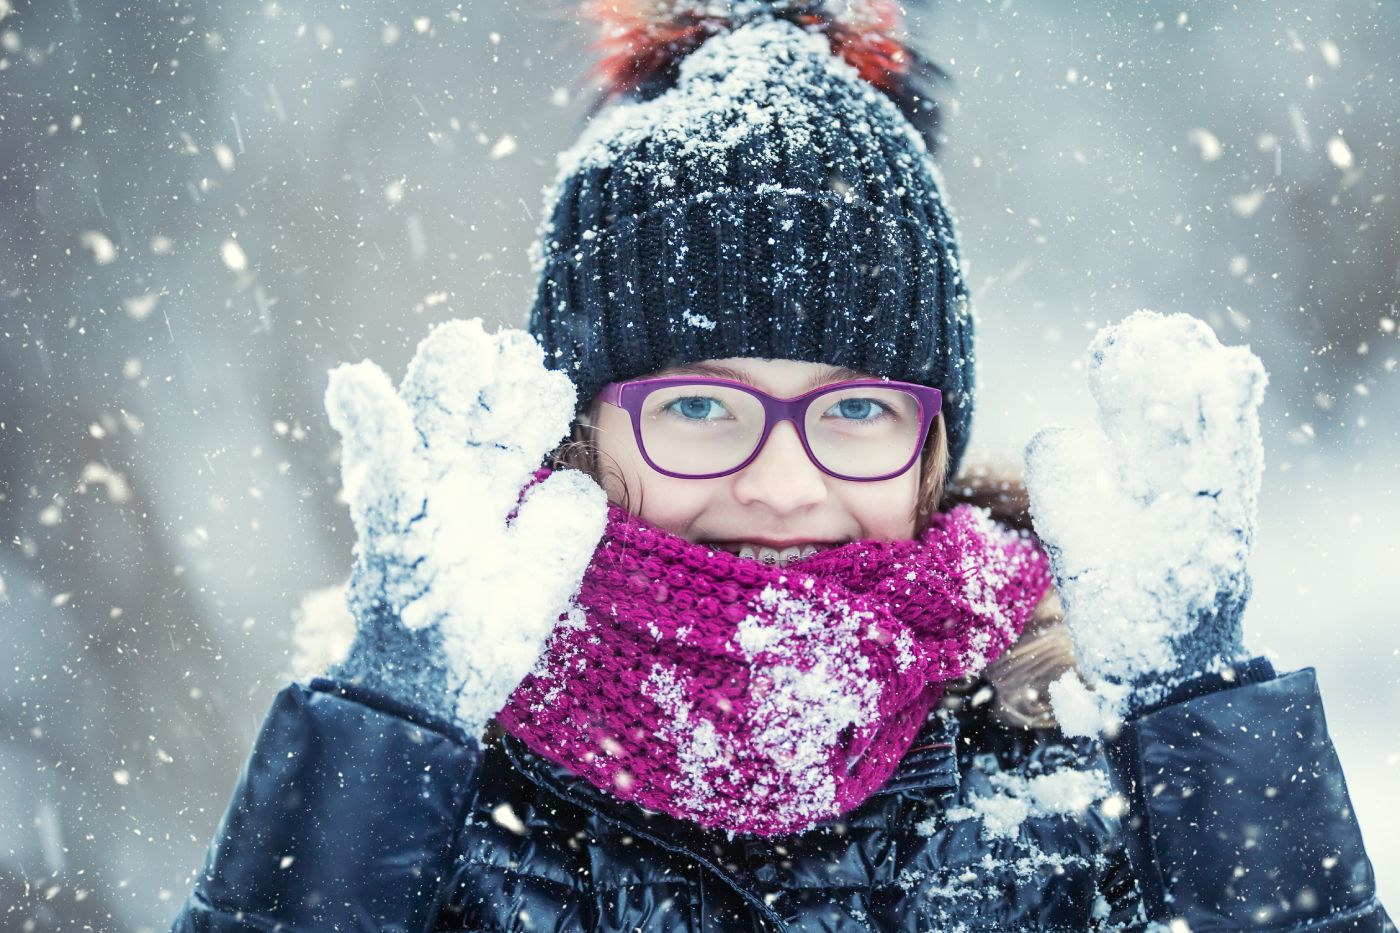 Winter Eye Safety For Children: What Parents Need to Know